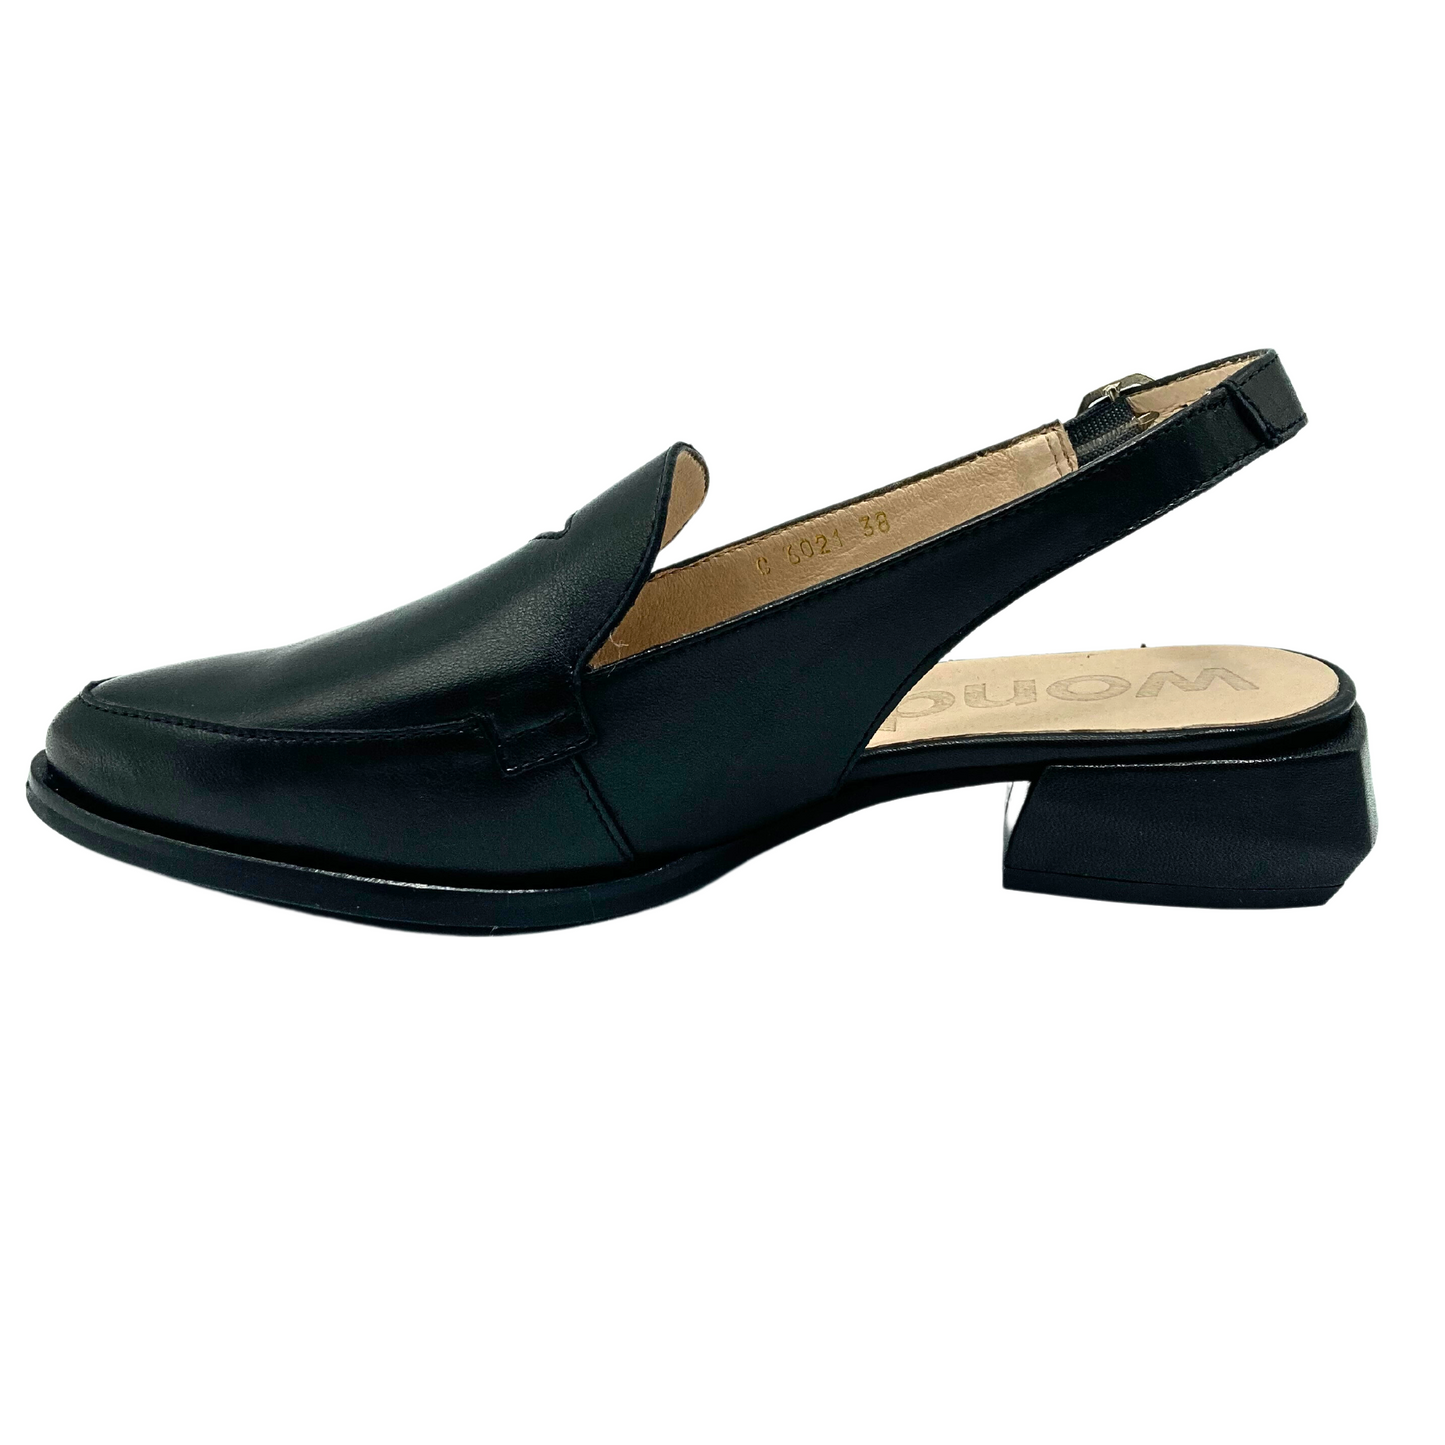 Inside view of slingback loafer in black leather with low, square heel.